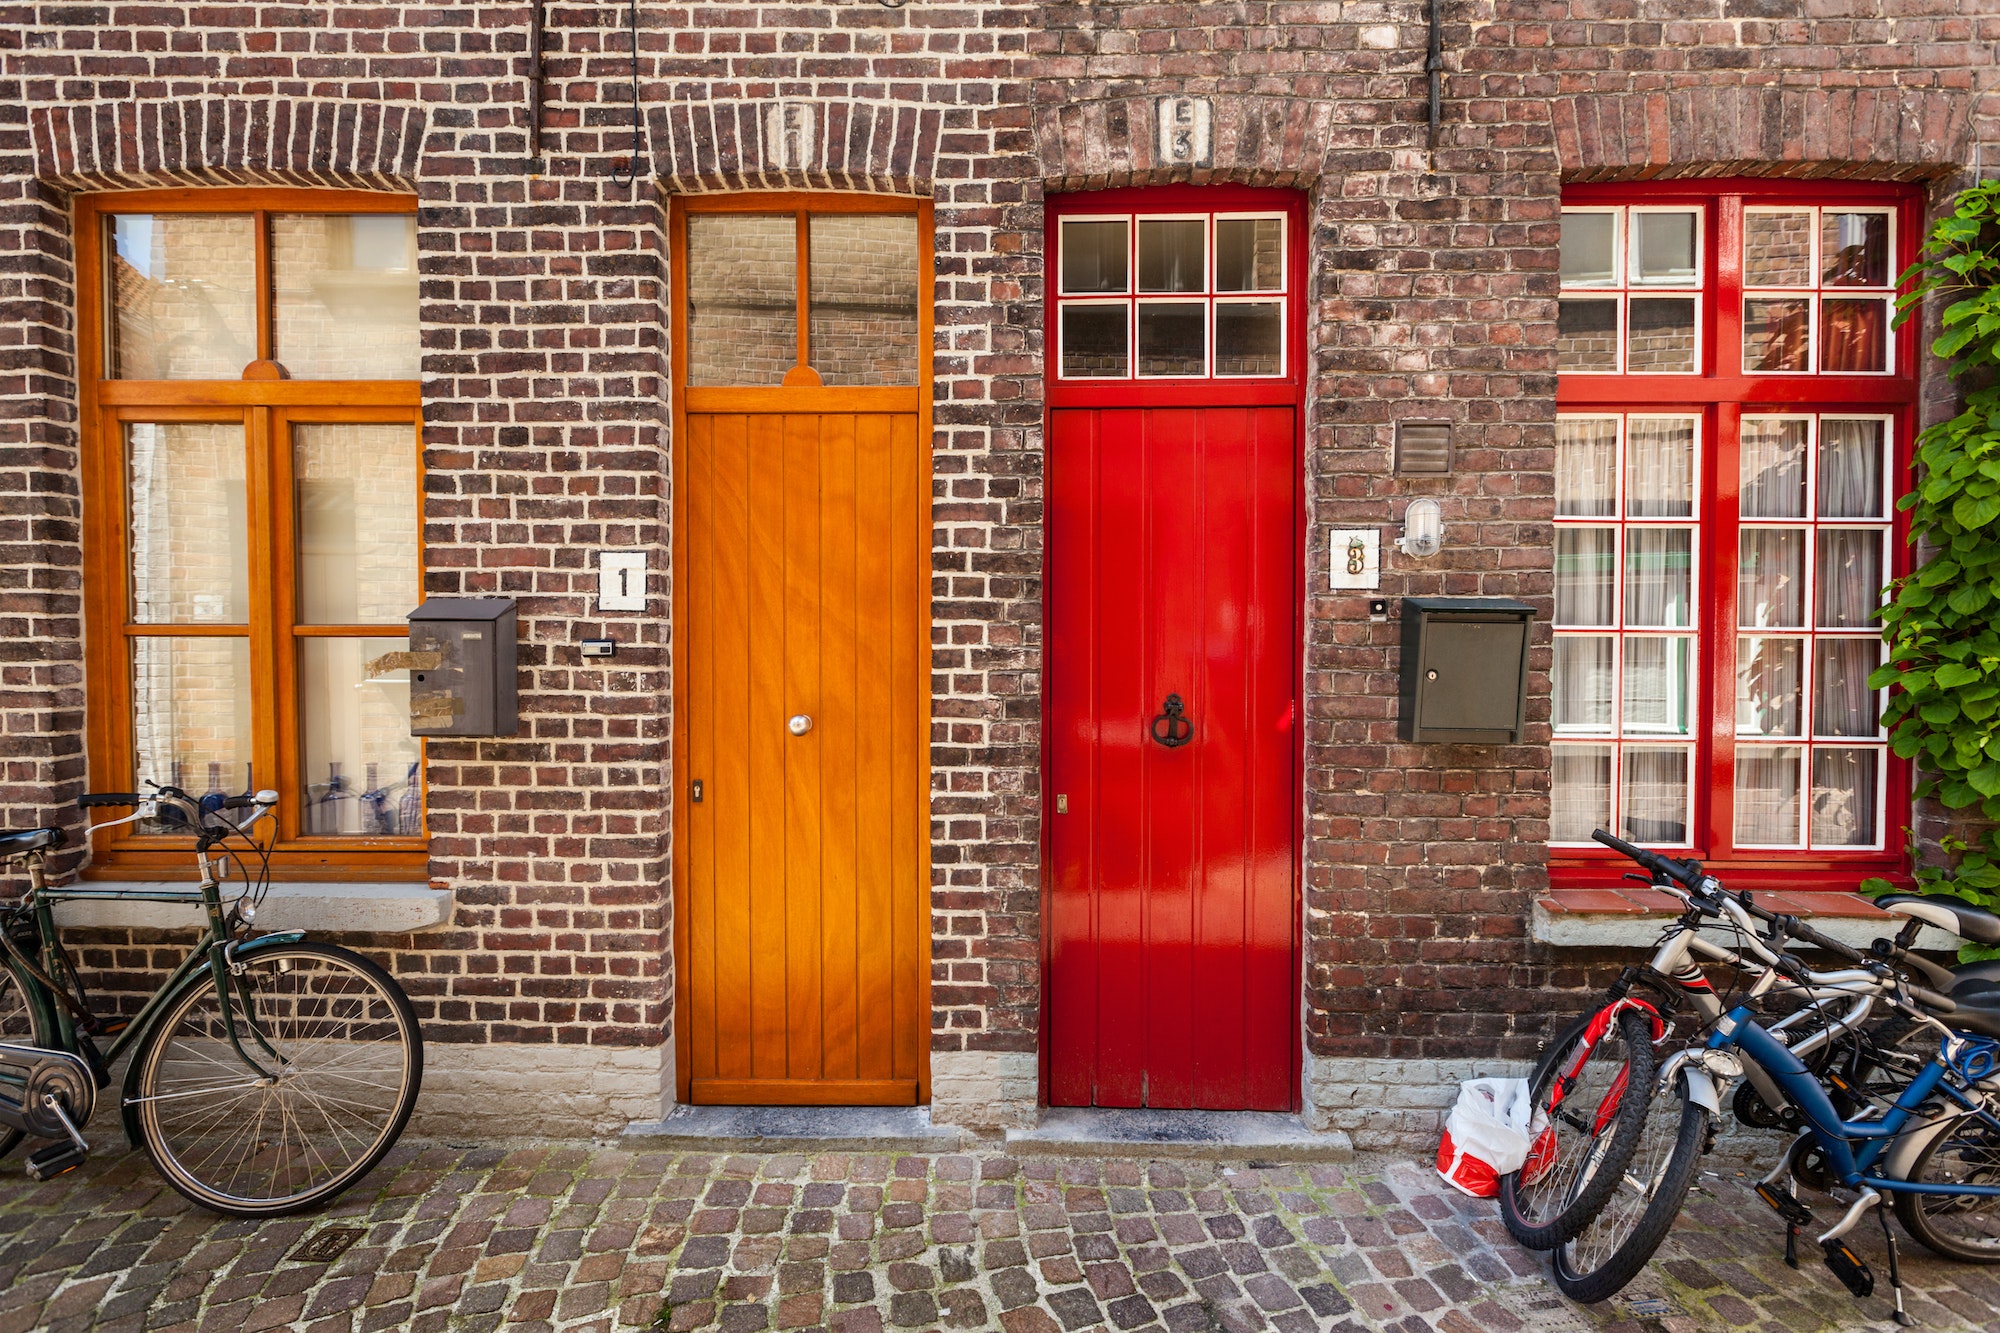 Doors of old houses and bicycles in european city Bruges (Brugge